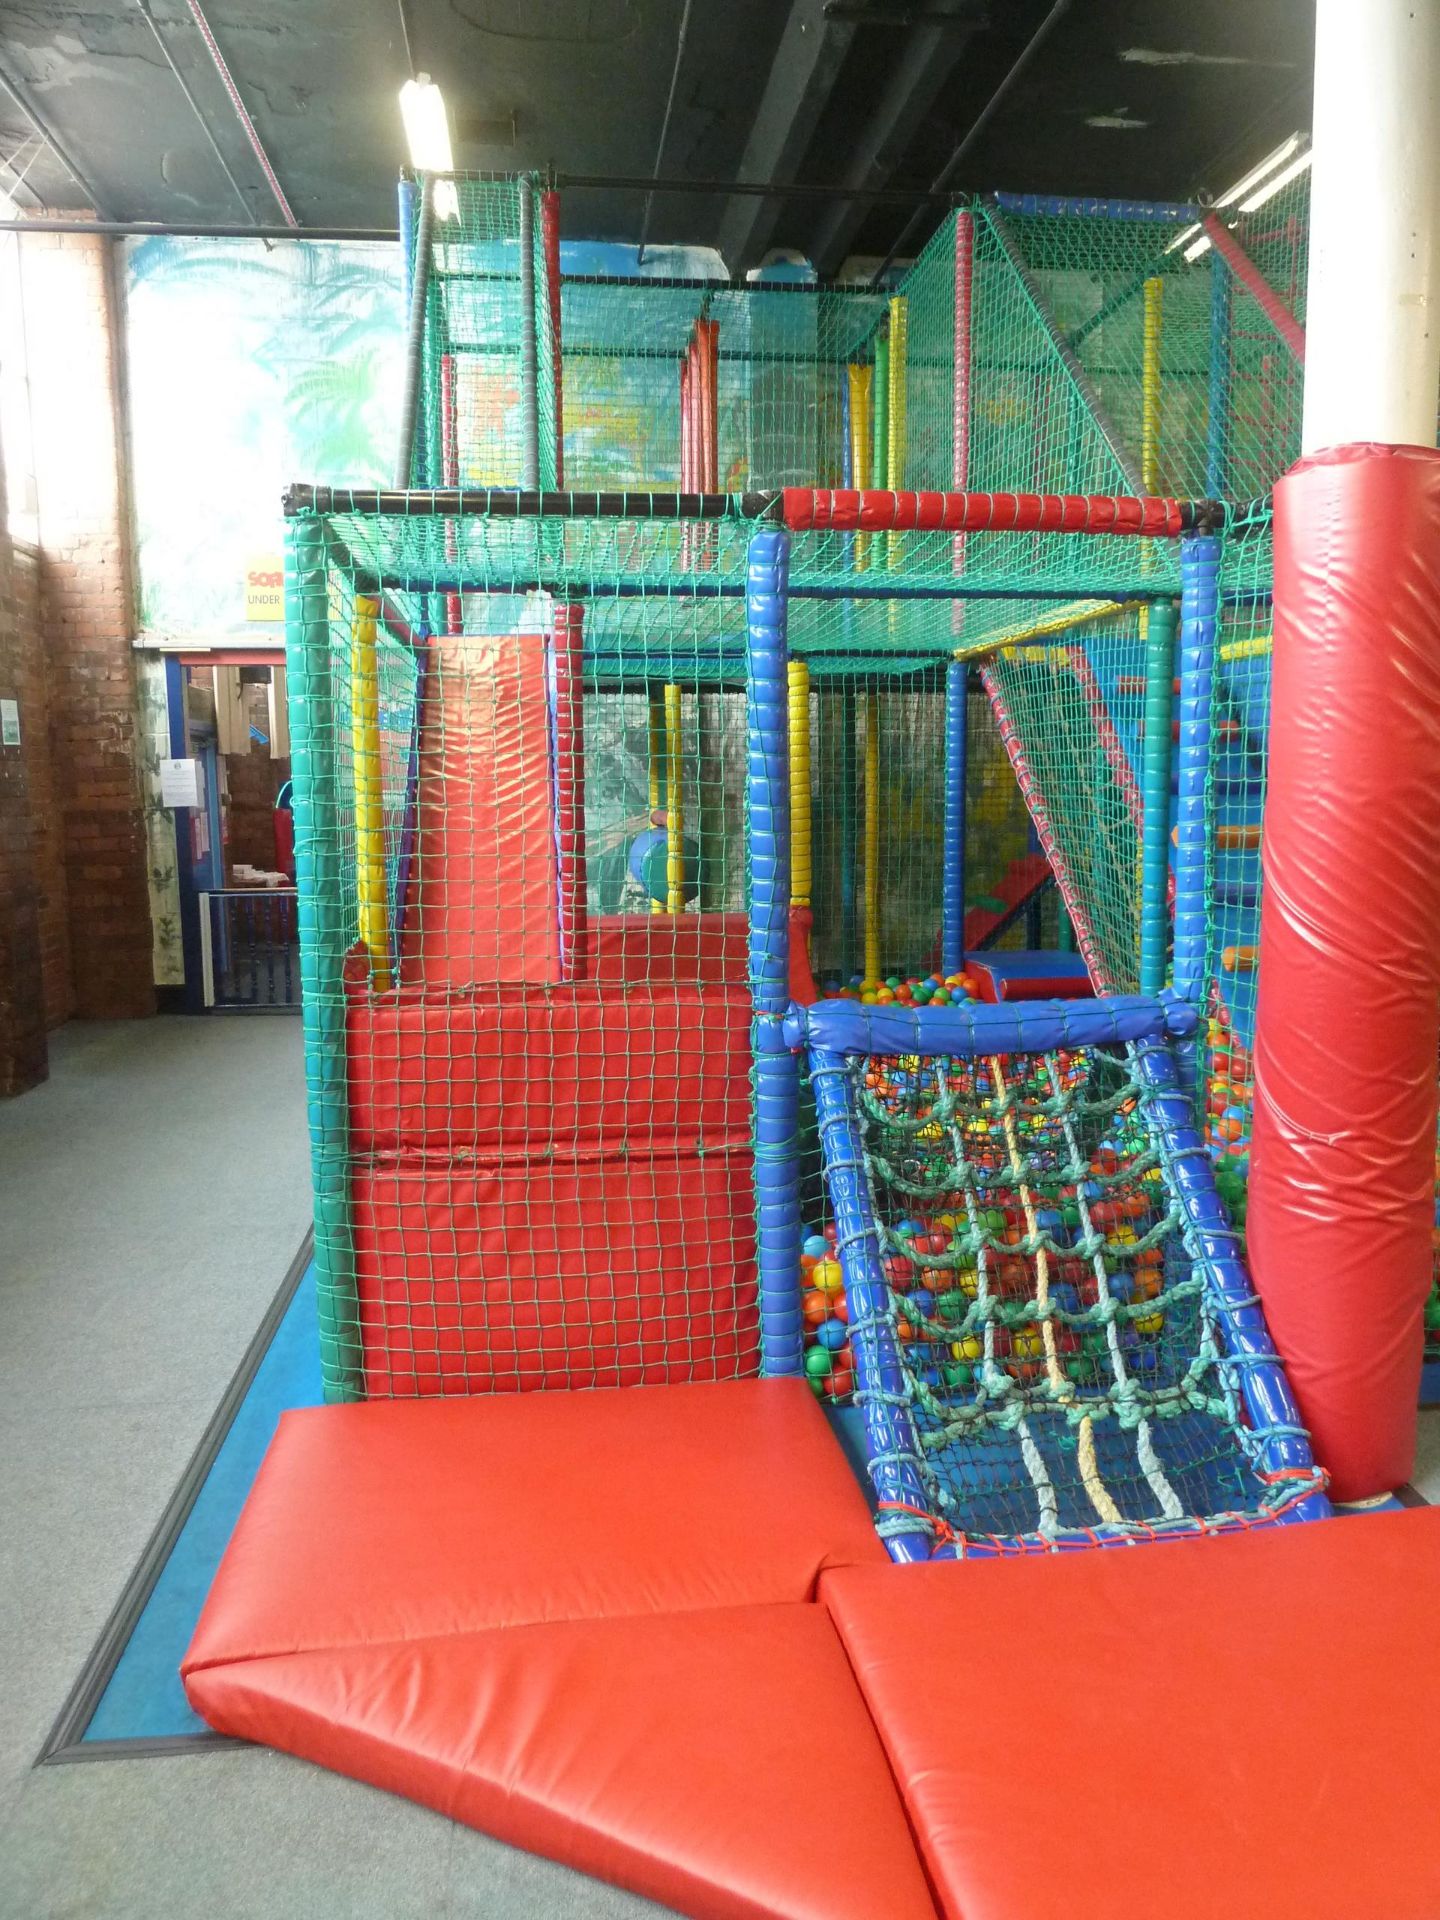 *Large soft play construction - 7.8m w x 5.8m d x 4.2m h. Constructed over two levels - Image 3 of 34